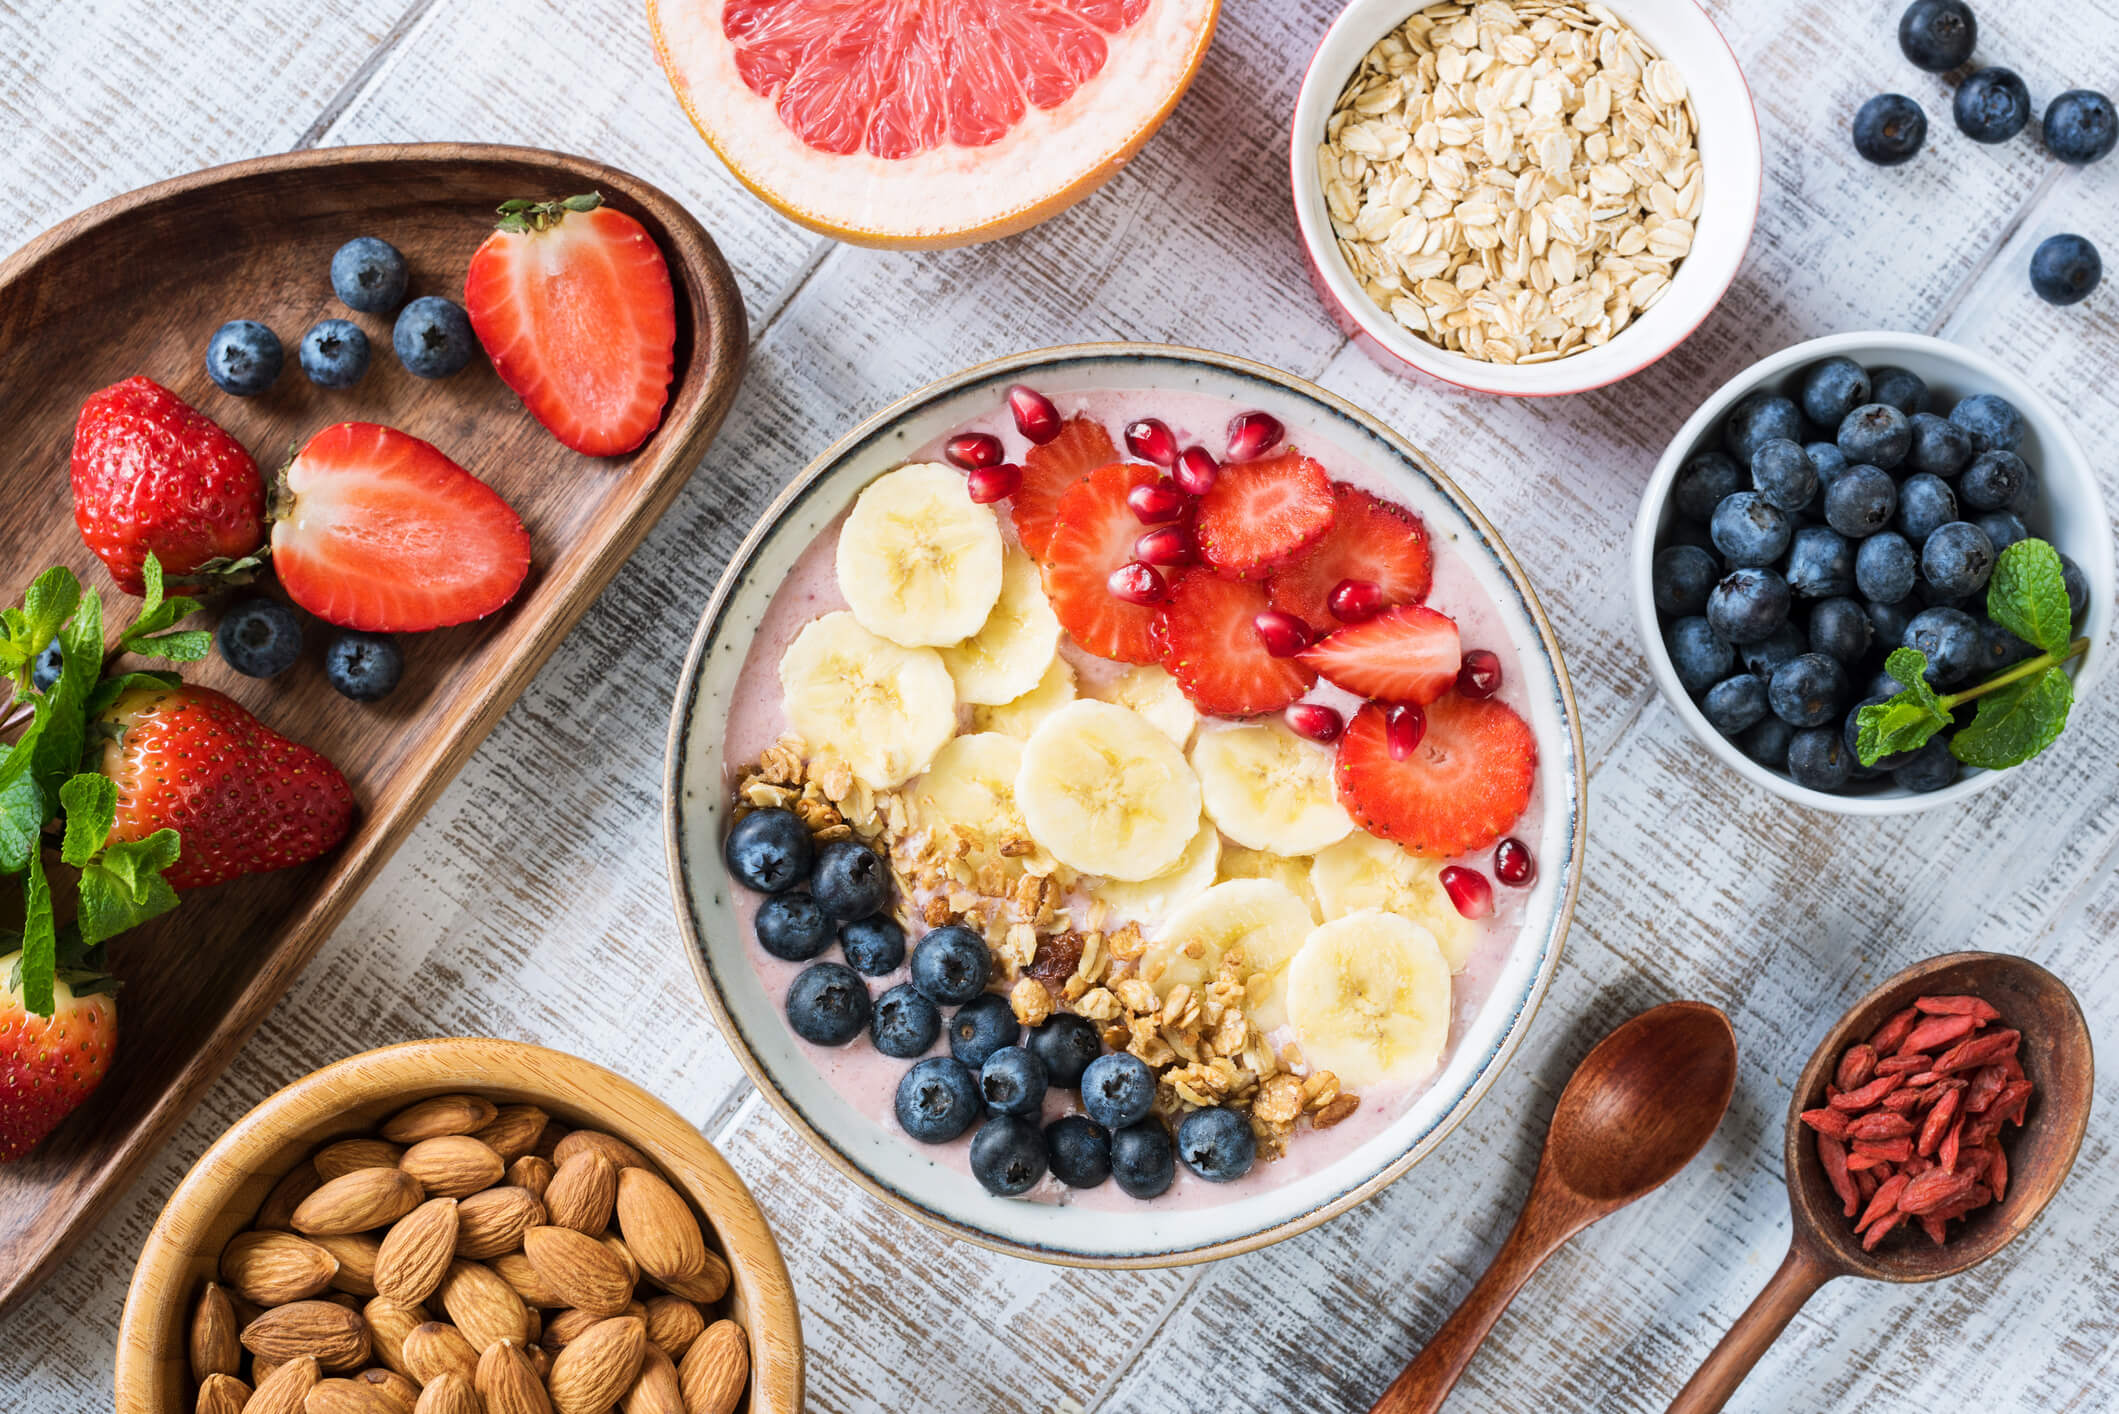 A variety of healthy breakfast options are arranged on a whitewashed wooden background including a bowl of smoothie topped with fruit and granola, a bowl of almonds, a bowl of blueberries, a bowl of strawberries, a bowl of oatmeal, a bowl of goji berries, and a sliced grapefruit.